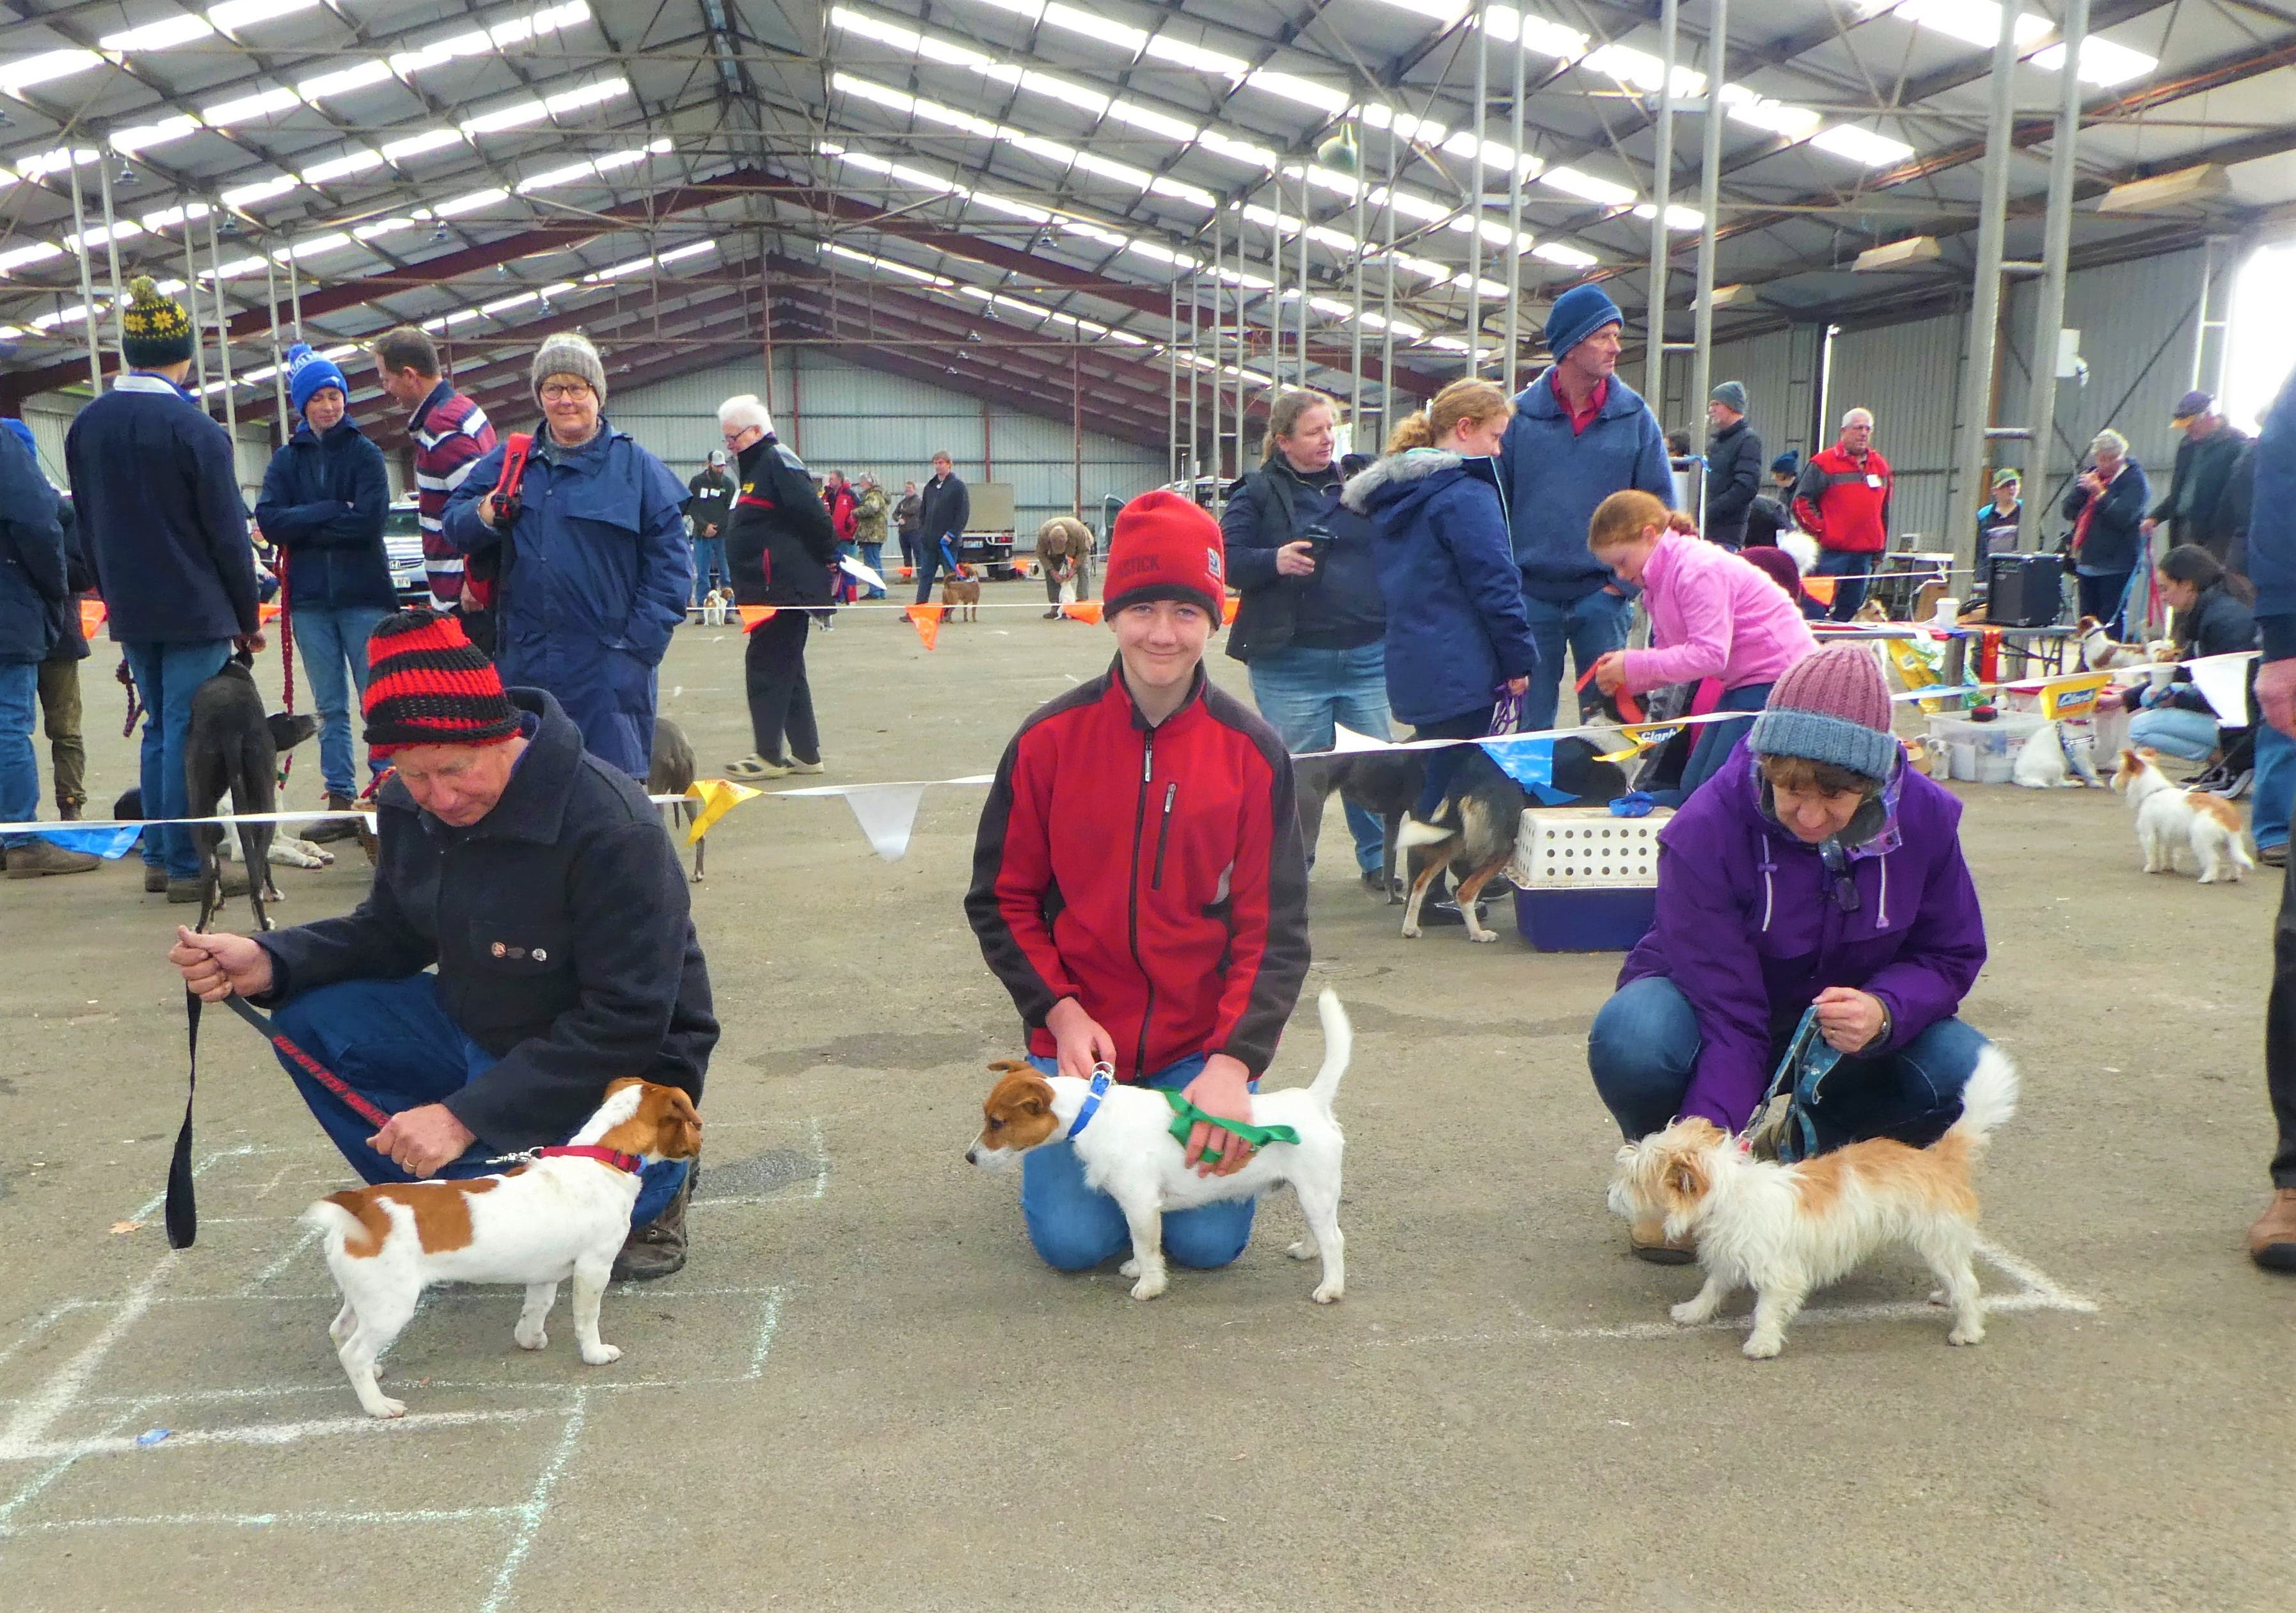 Hamilton Jack Russell Terrier and Hunting Dog Show - Great Ocean Road Tourism